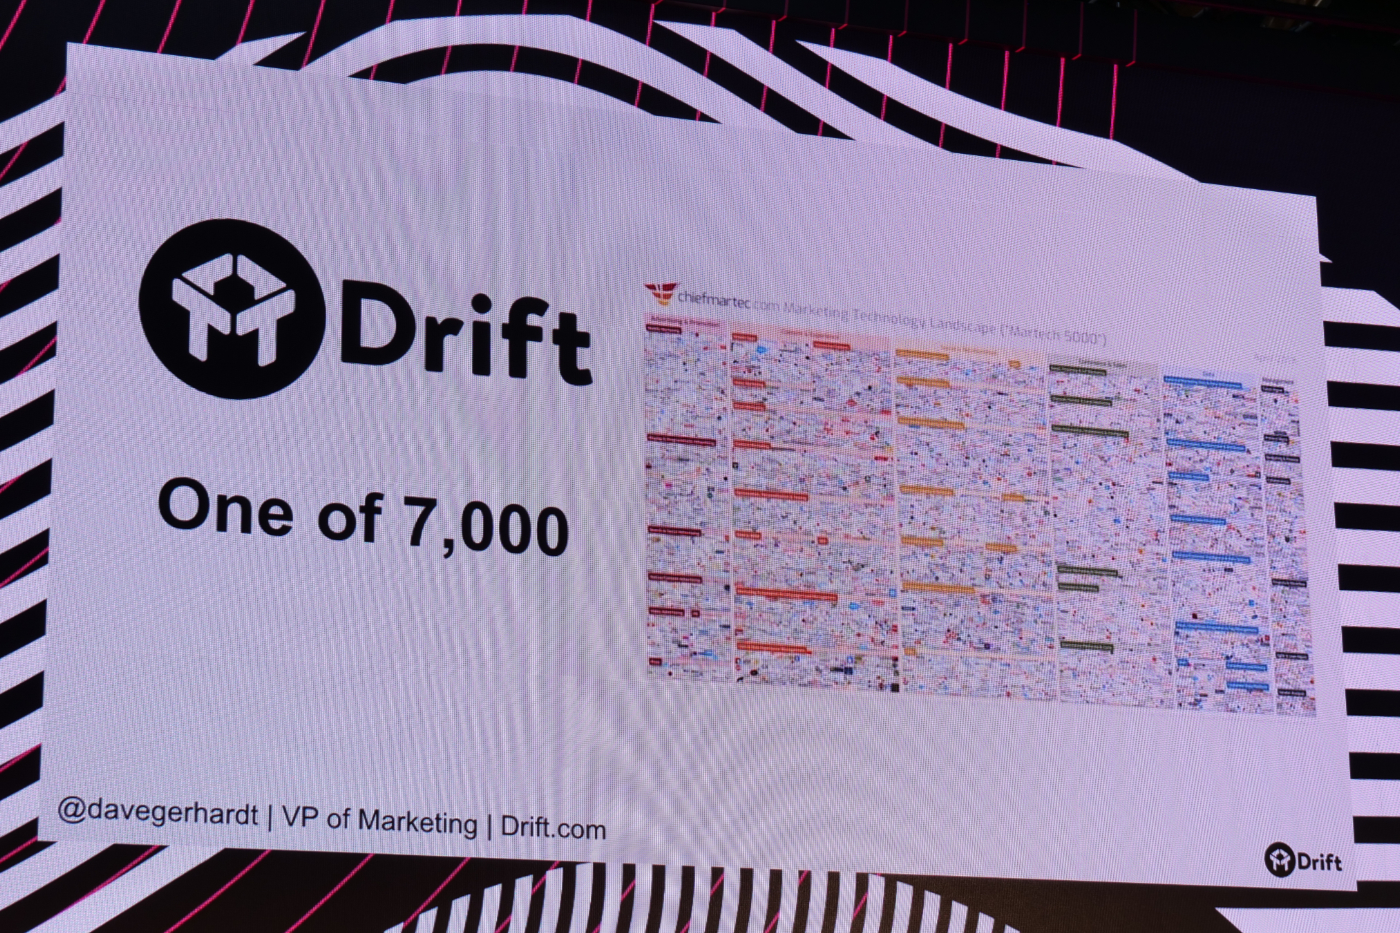 Drift is one of the 7000 marketing technology vendors